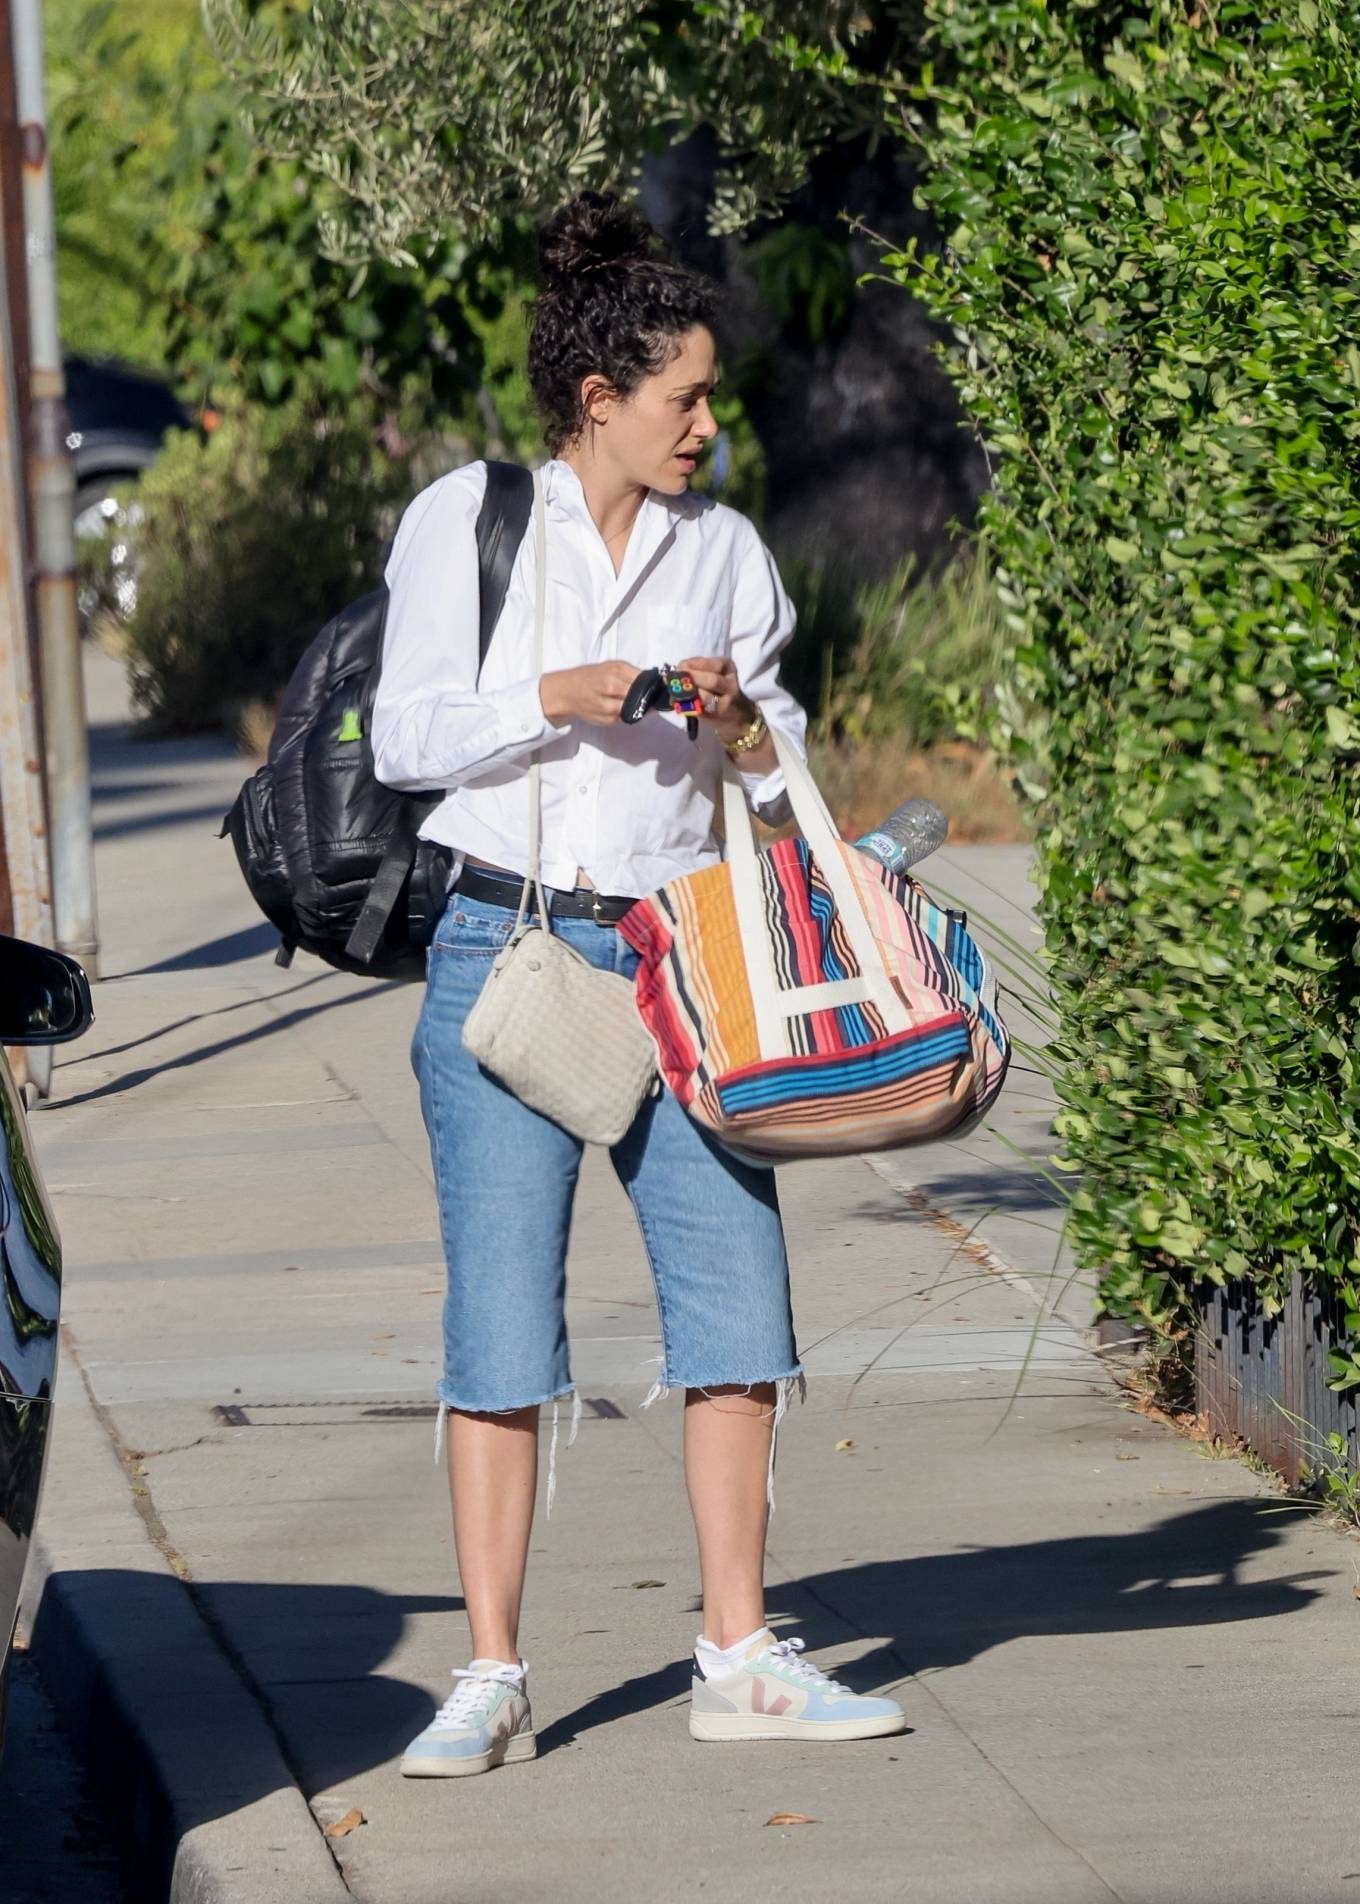 Emmy Rossum - Seen arriving at friends for a visit in Los Angeles.